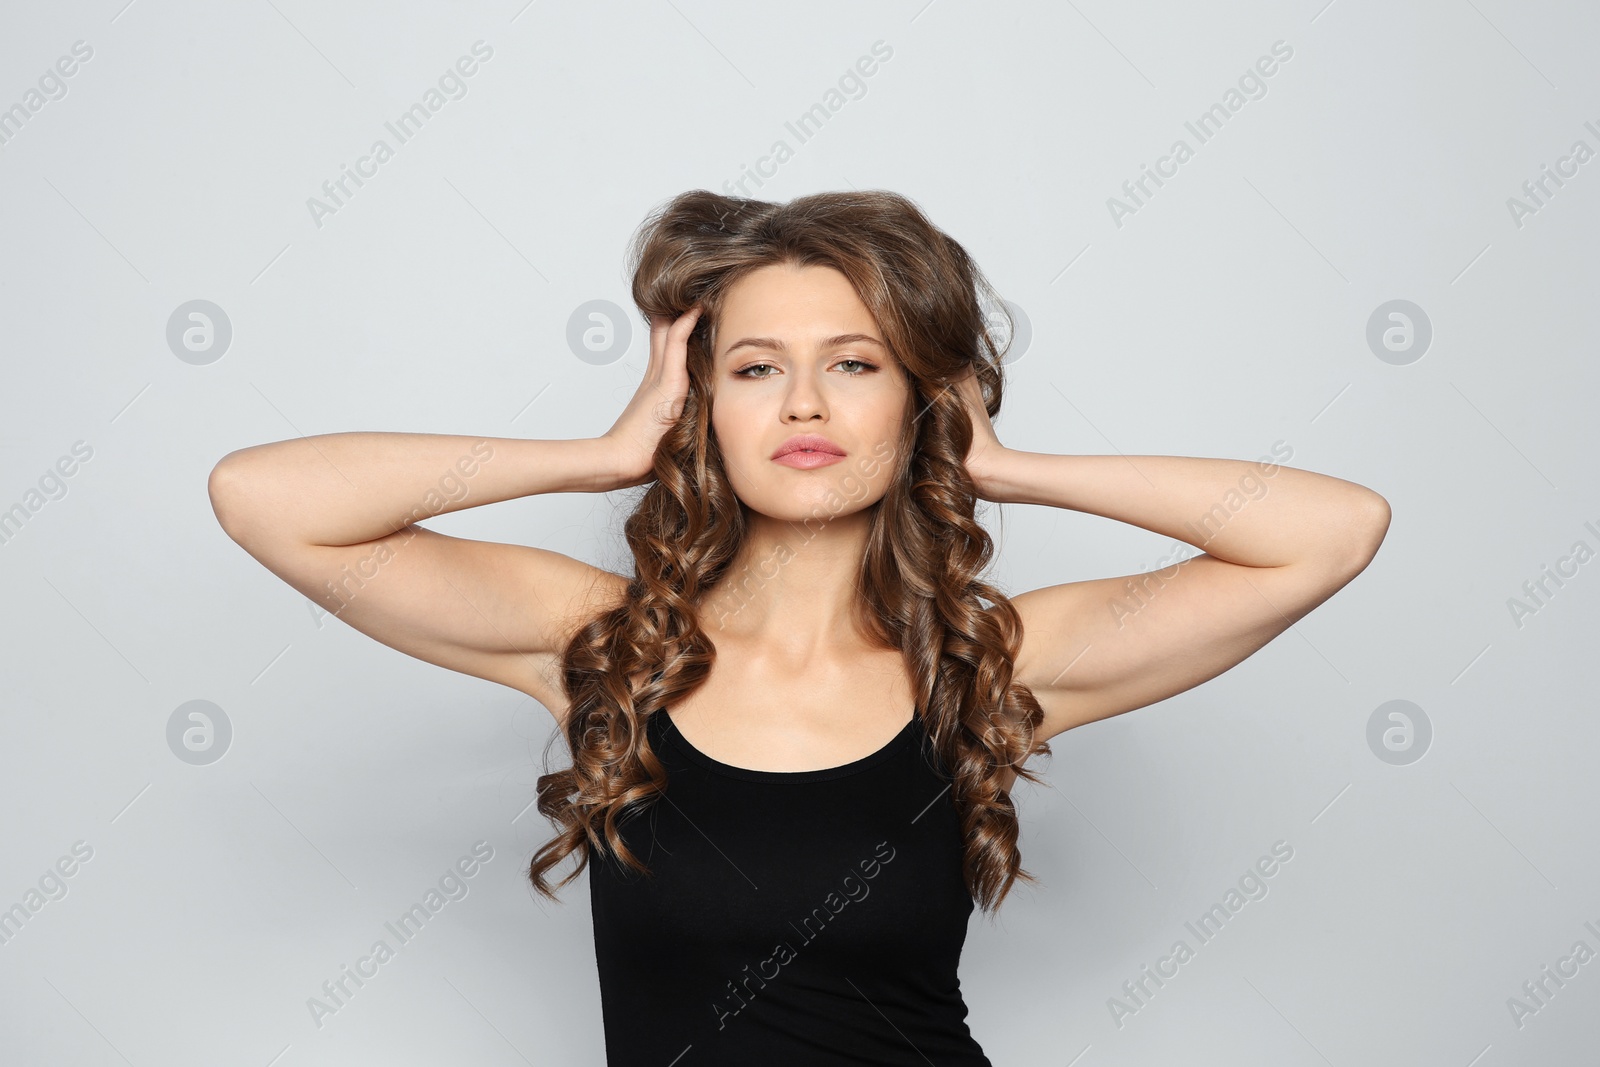 Photo of Portrait of beautiful young woman with shiny wavy hair on color background